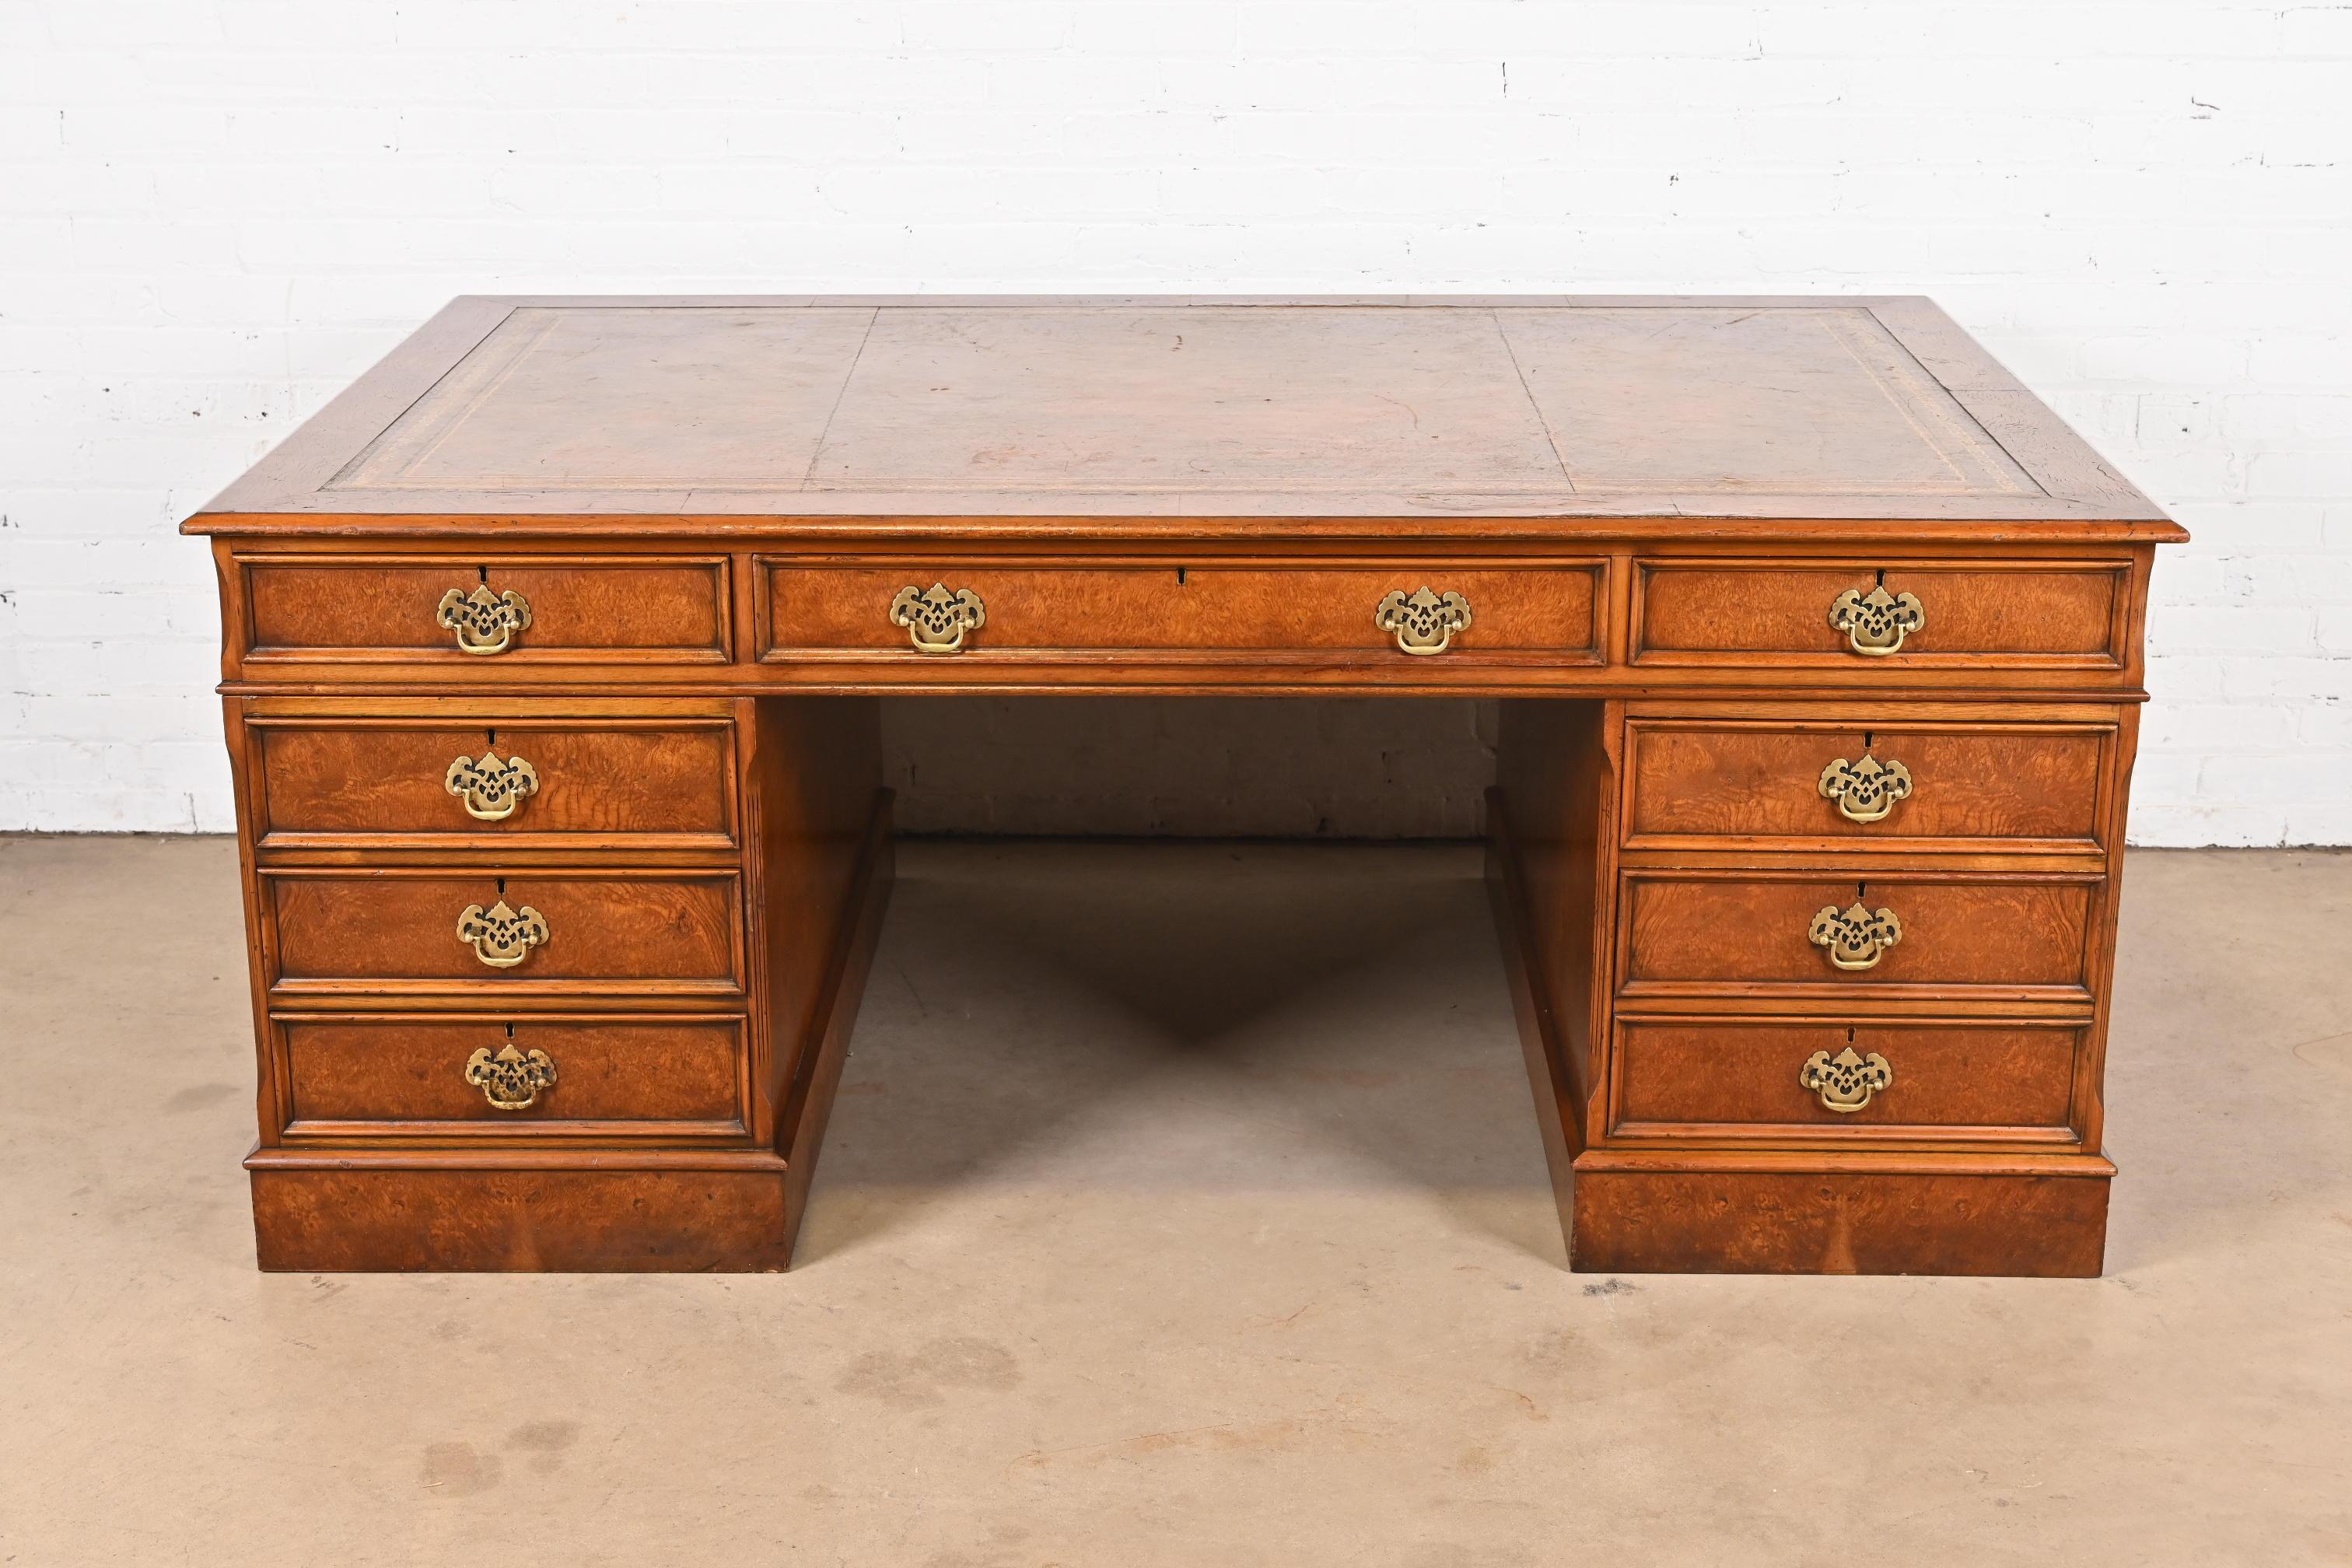 A stately Georgian or Chippendale style double-sided executive partners desk with inlaid leather top

In the manner of Baker Furniture

USA, Circa Mid-20th Century

Gorgeous burled walnut, with original brass pulls and inlaid embossed leather